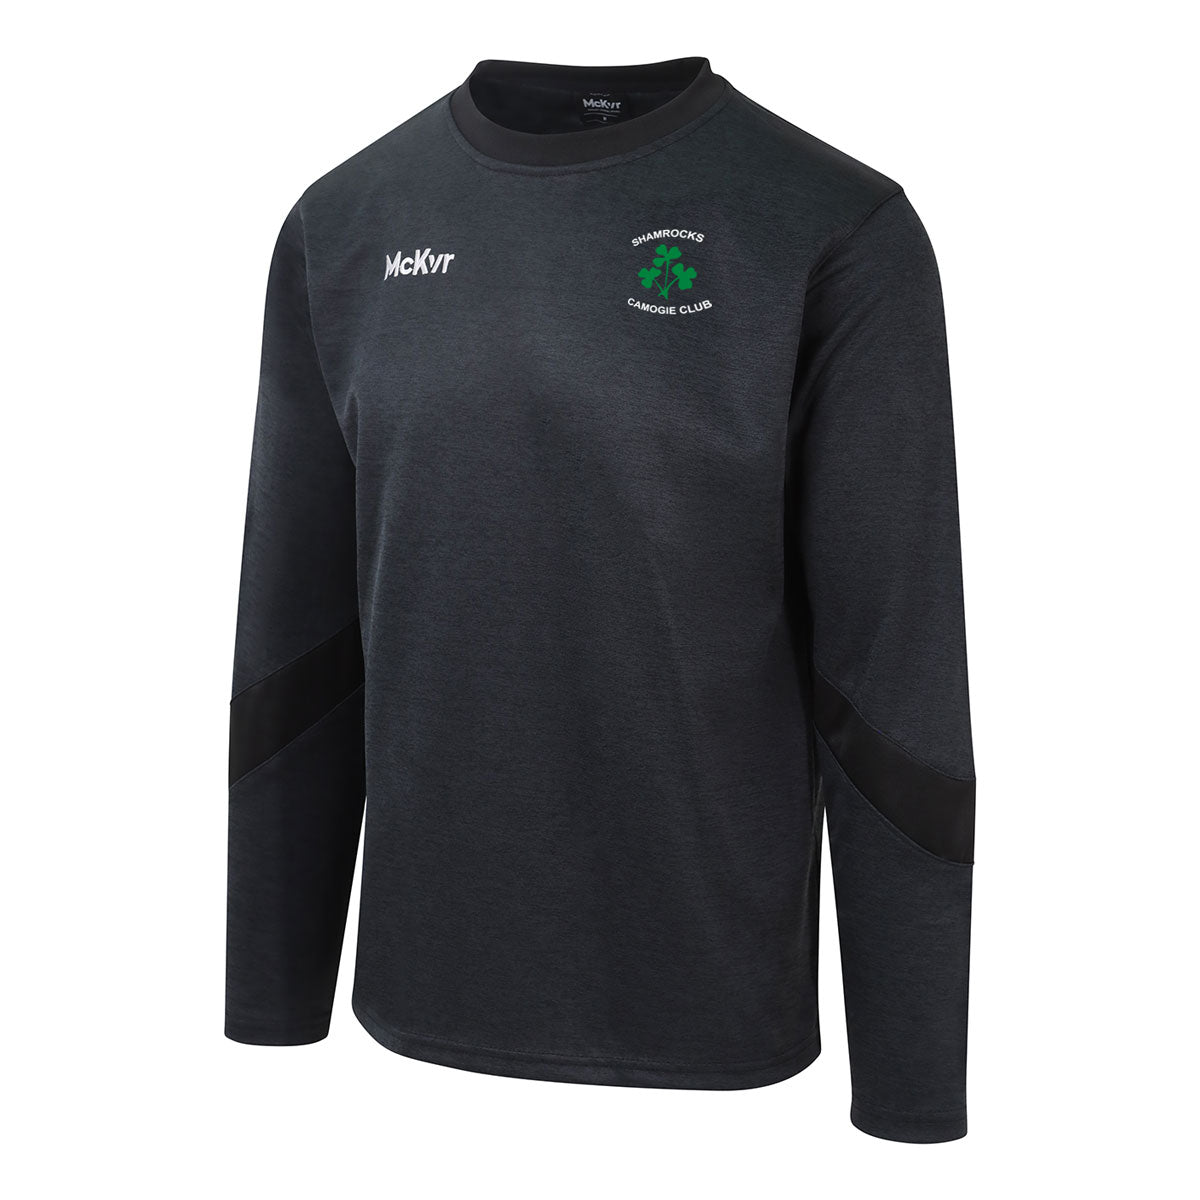 Mc Keever Shamrocks Camogie - Galway Core 22 Sweat Top - Youth - Black